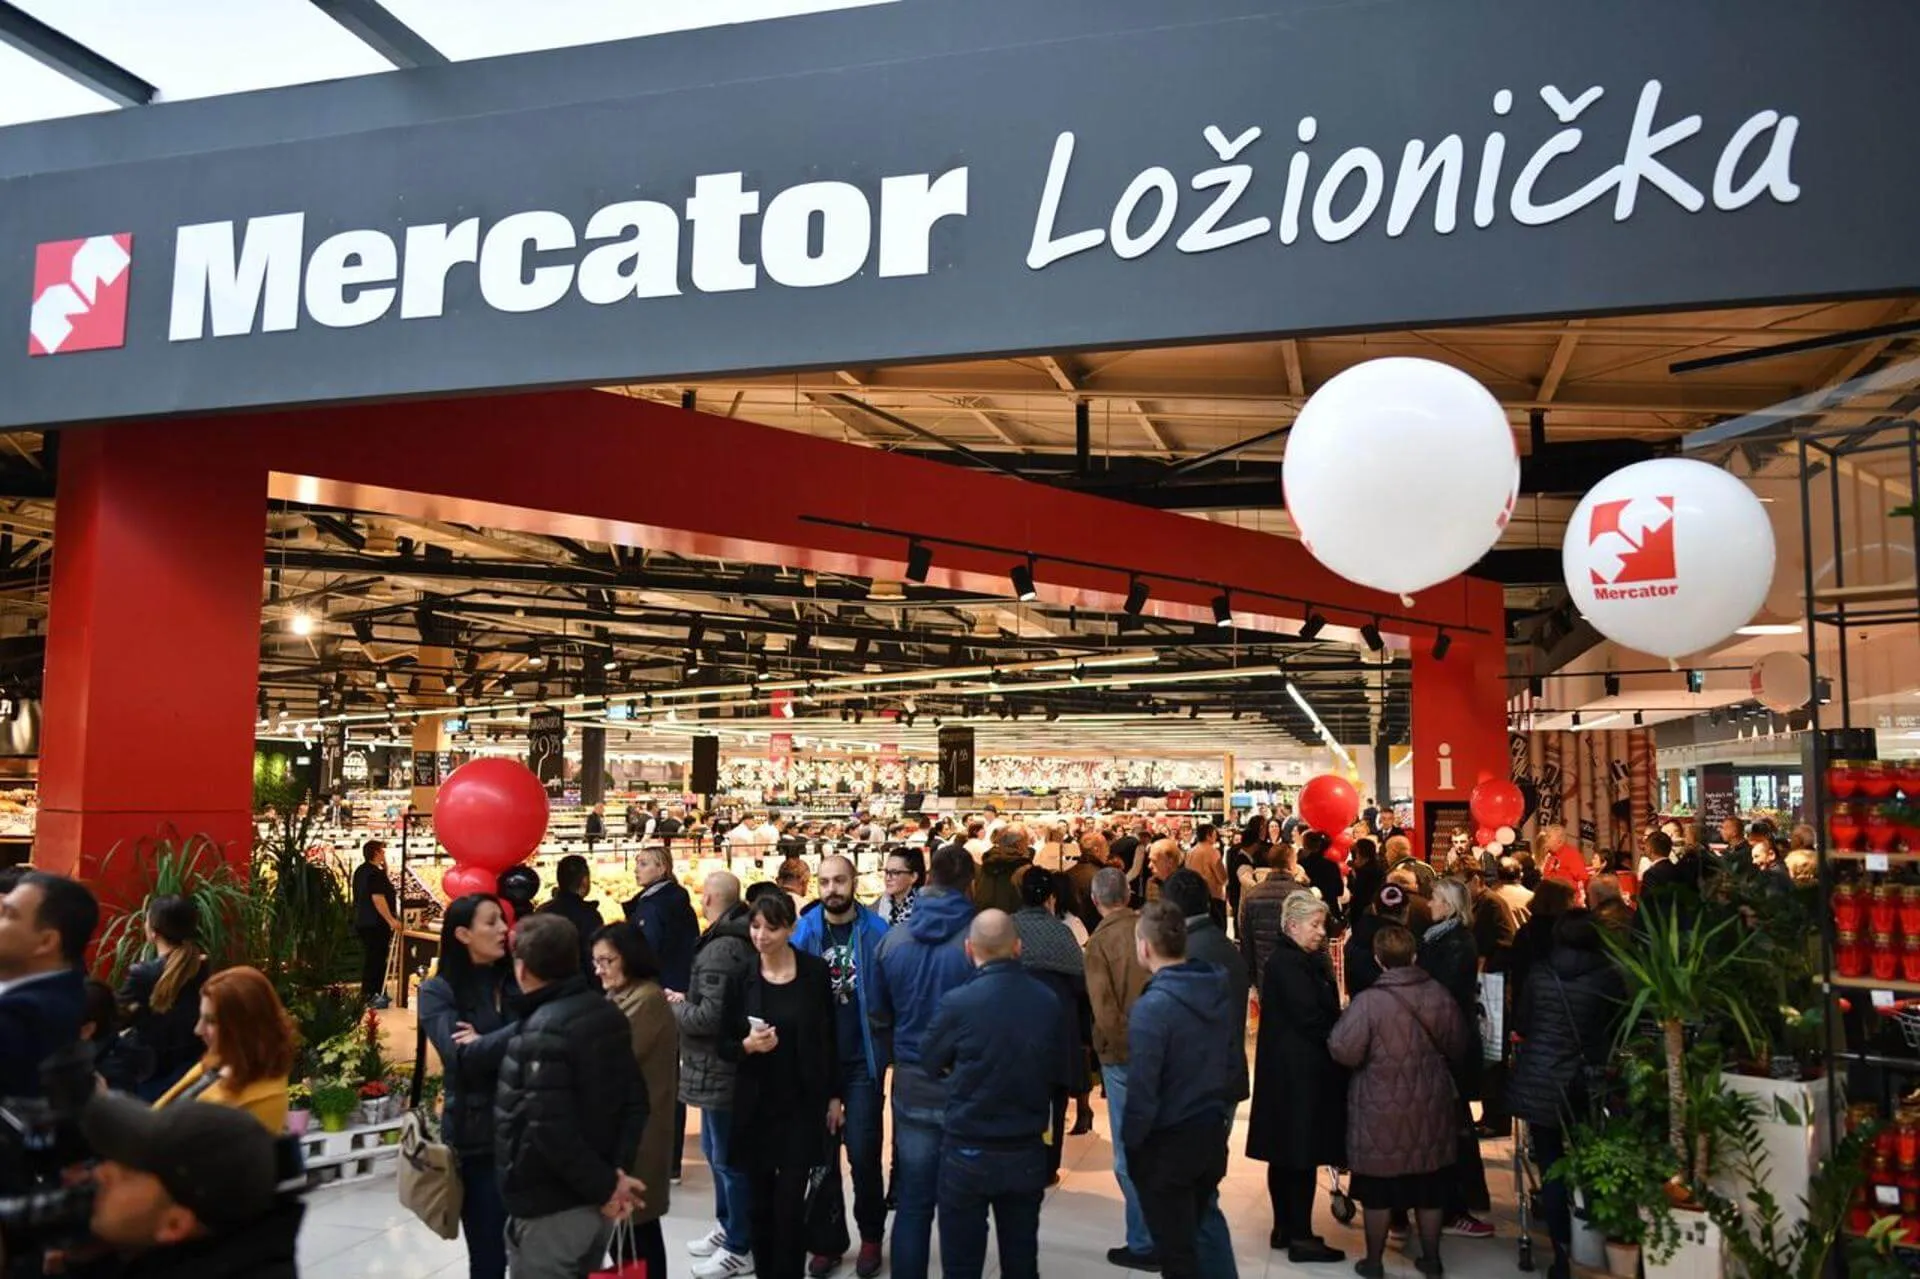 Mercator Lozionicka in Bosnia and Herzegovina, europe | Fragrance,Shoes,Accessories,Clothes,Gifts,Natural Beauty Products,Cosmetics - Country Helper